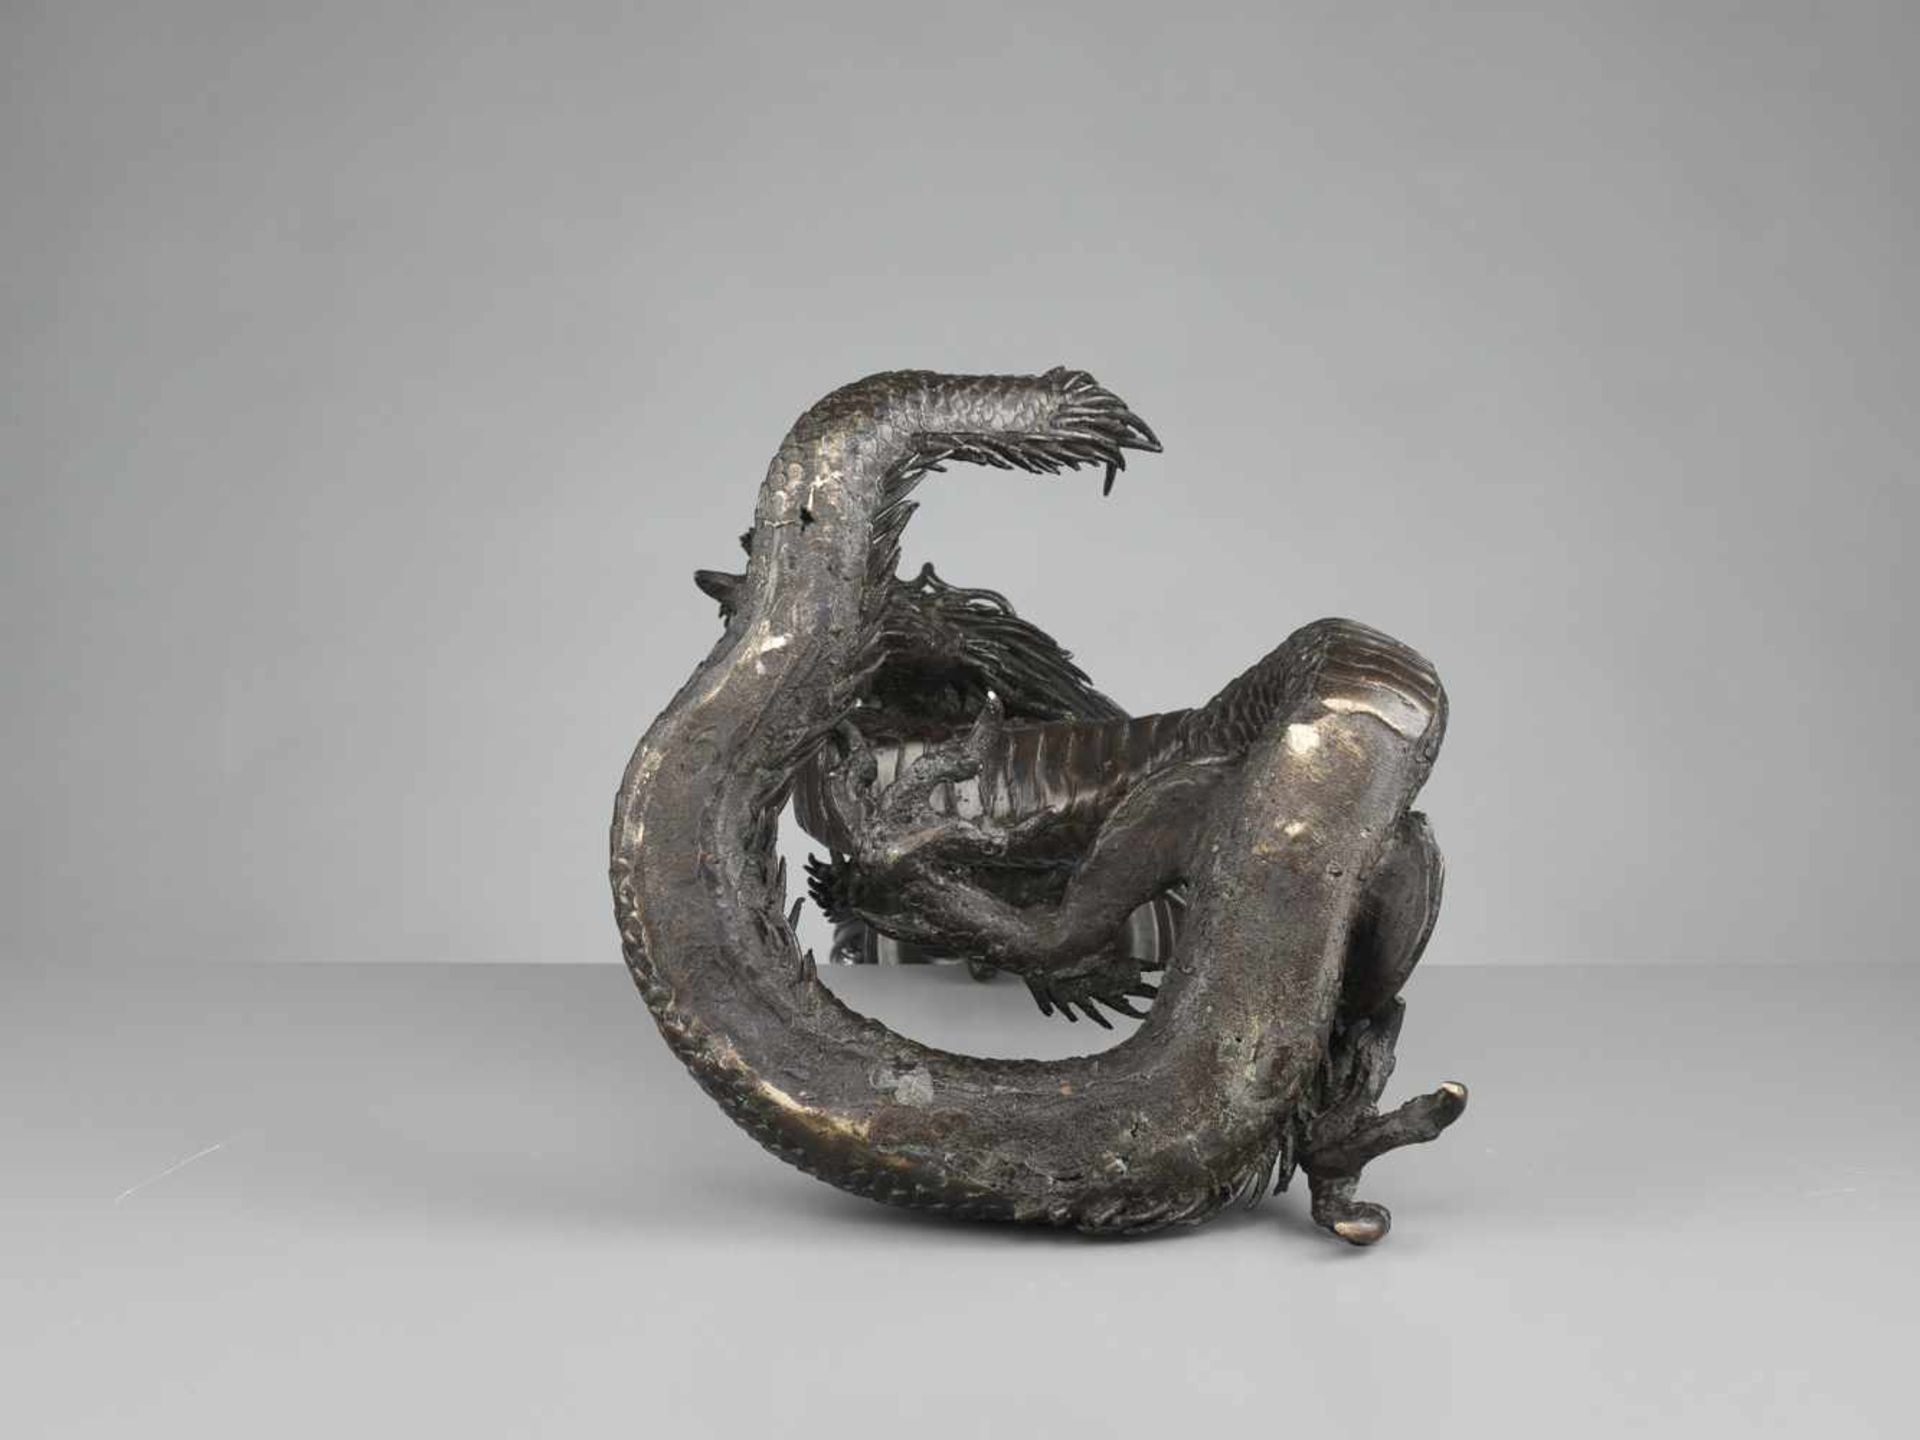 A LARGE AND MASSIVE DRAGON AND TEMPLE BELL BRONZE Japan, 19th century, late Edo period (1615-1868) - Image 9 of 10